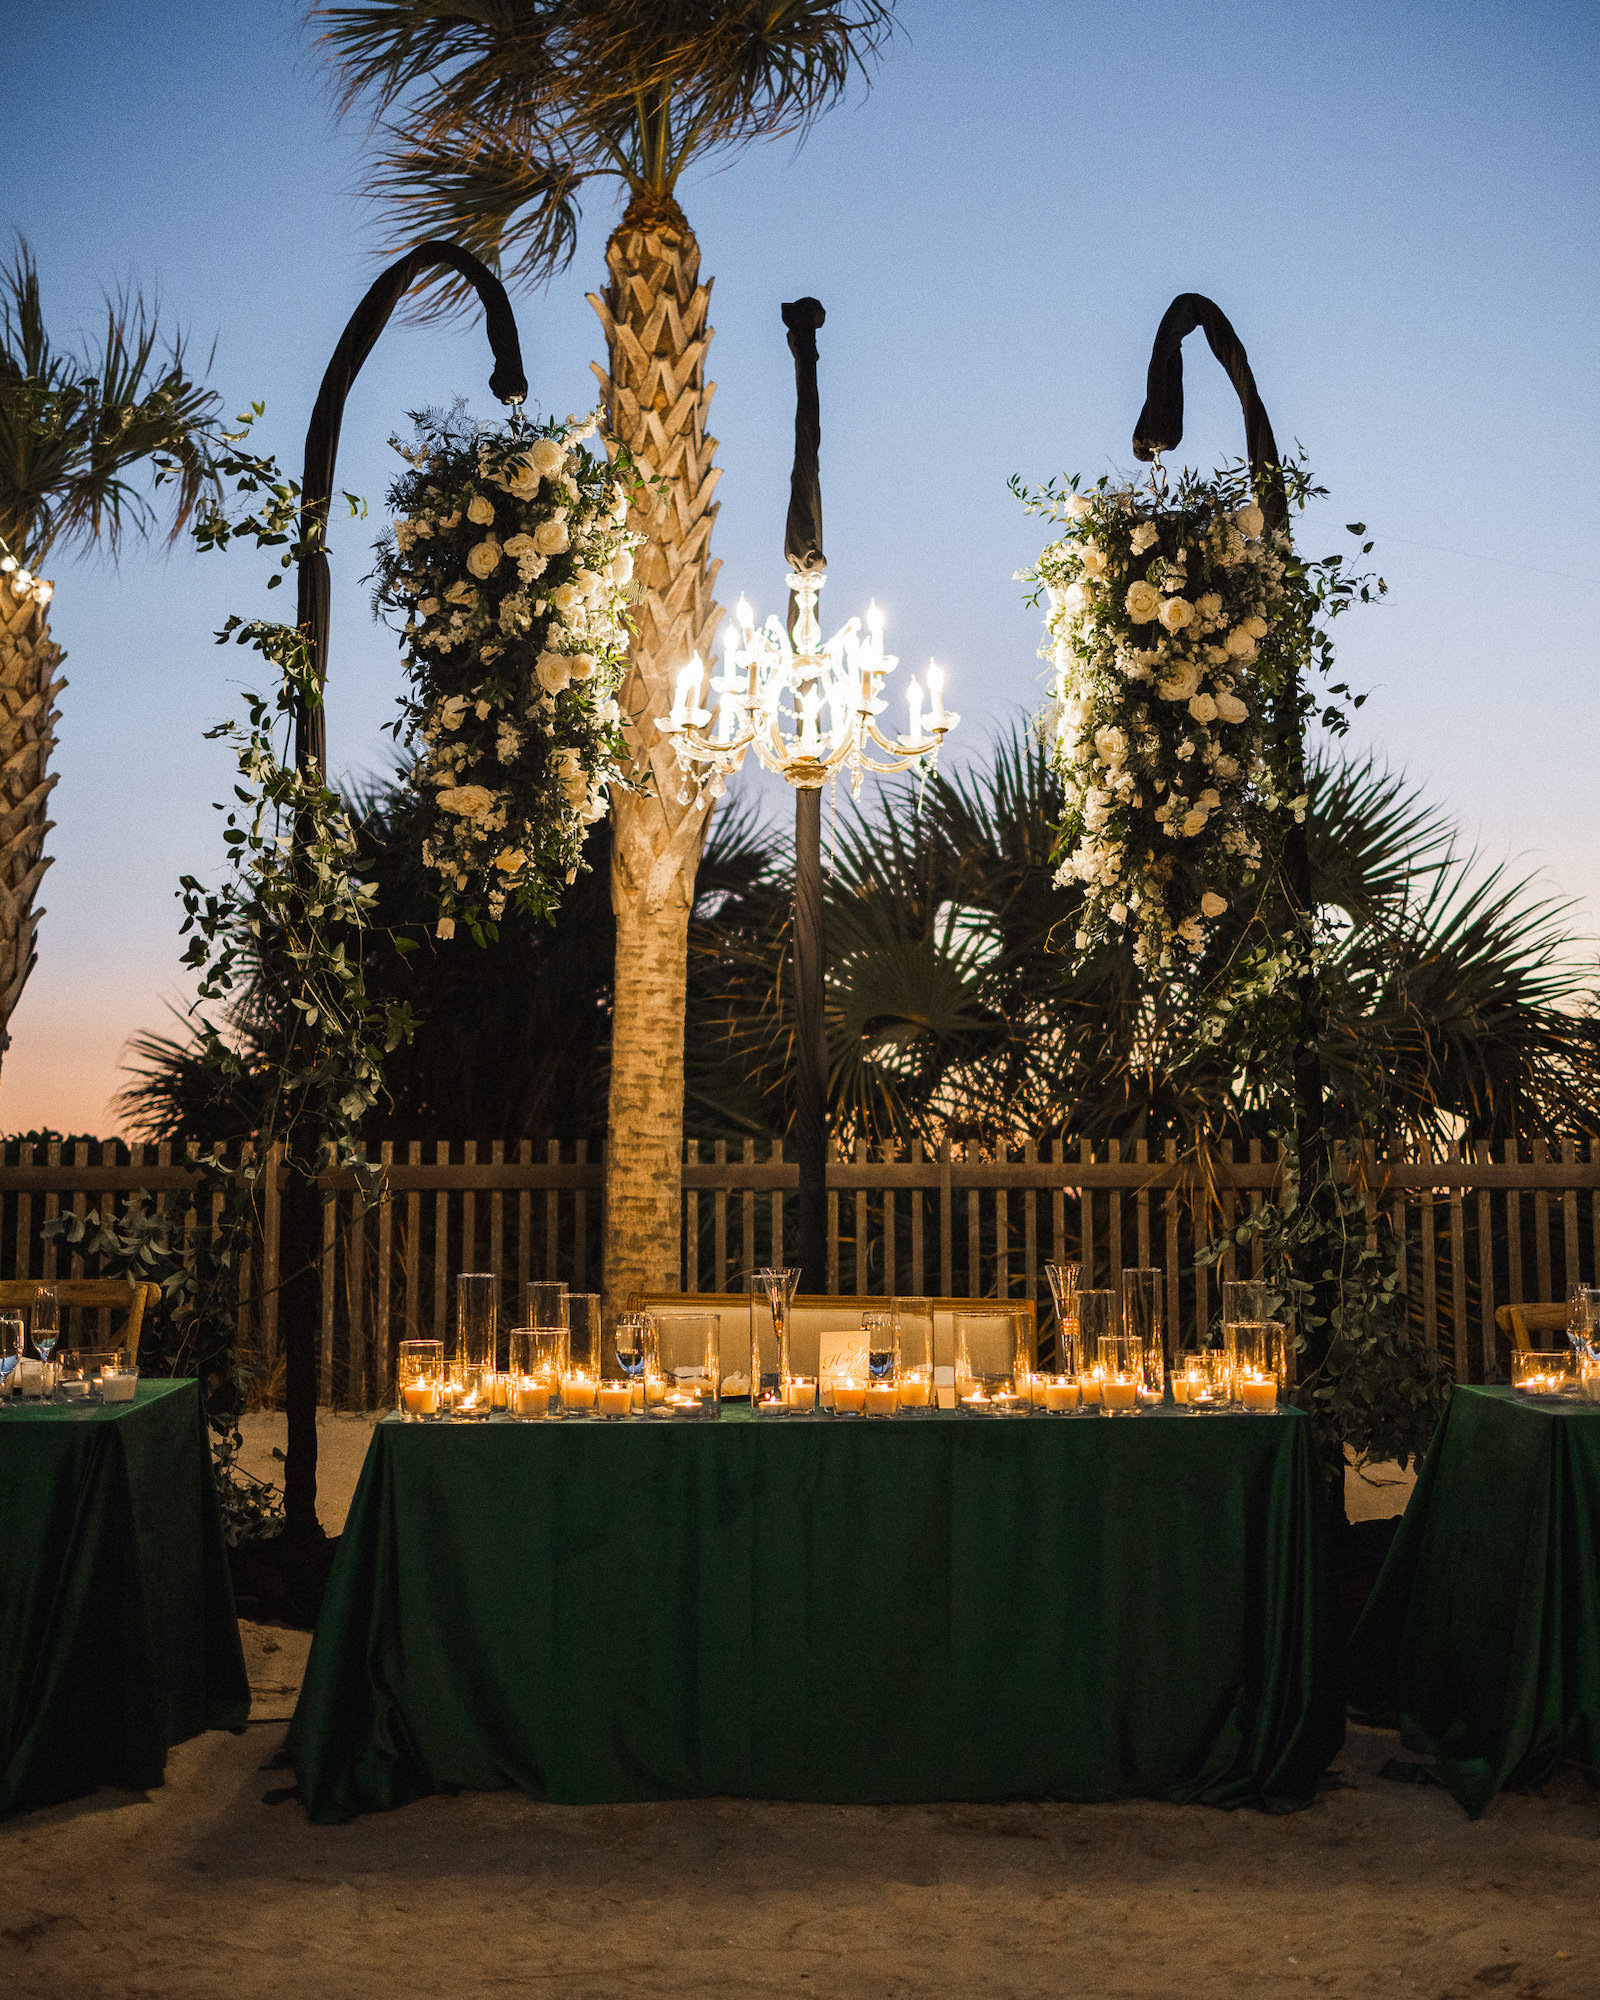 Sweetheart Table with Dining Bench and Candlelit Reception | Sarasota Lighting and Rental Company Gabro Event Services